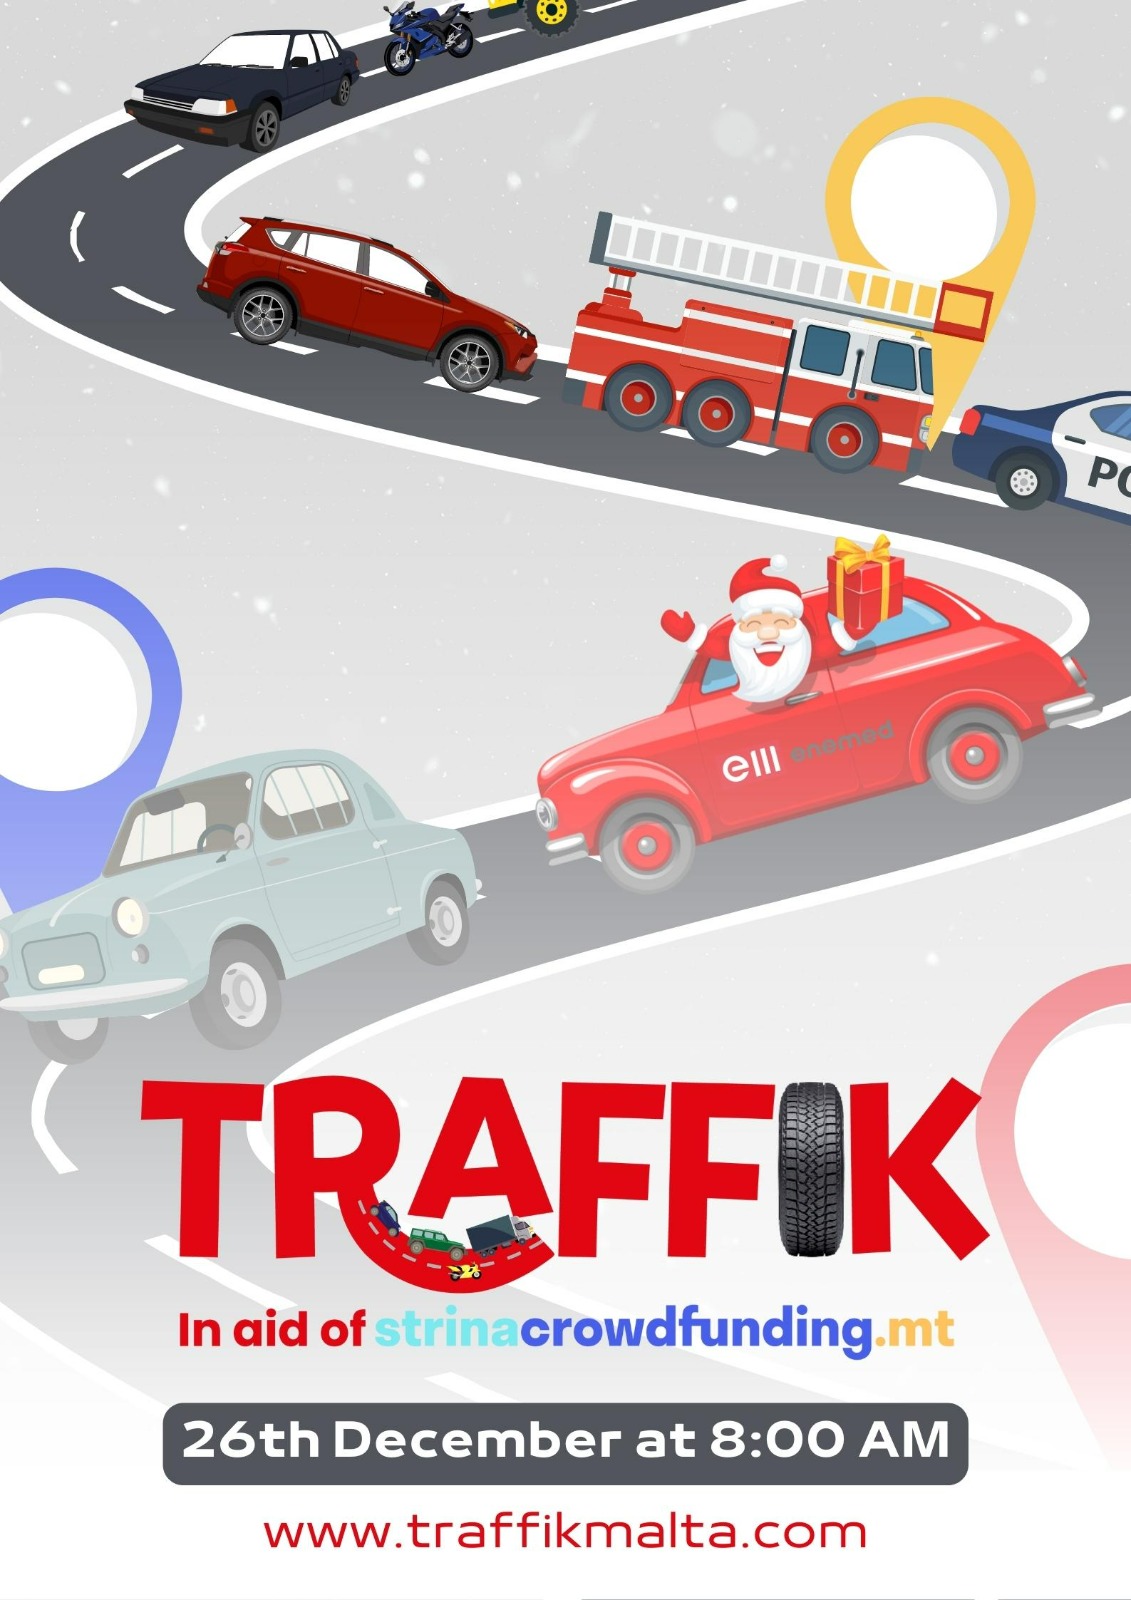 TRAFFIK in aid of strinacrowdfunding.mt poster